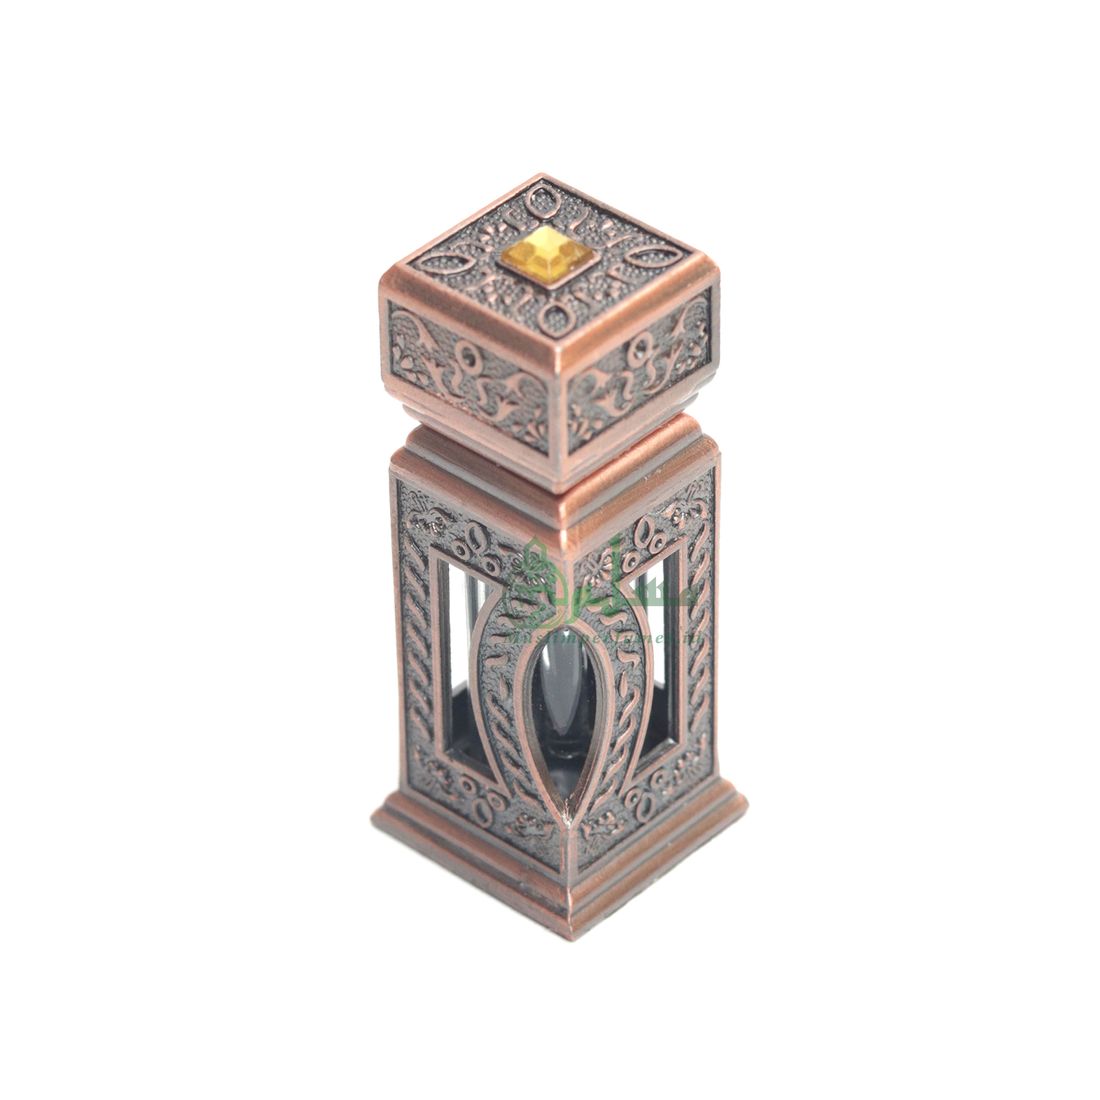 Square Window Islamic DESIGN Bronze Color SMALL EMPTY 3-ml Vial Bottle for Perfume Arab Prayer Attar Oud Oil, Pointed Glass Top Dipper Cap